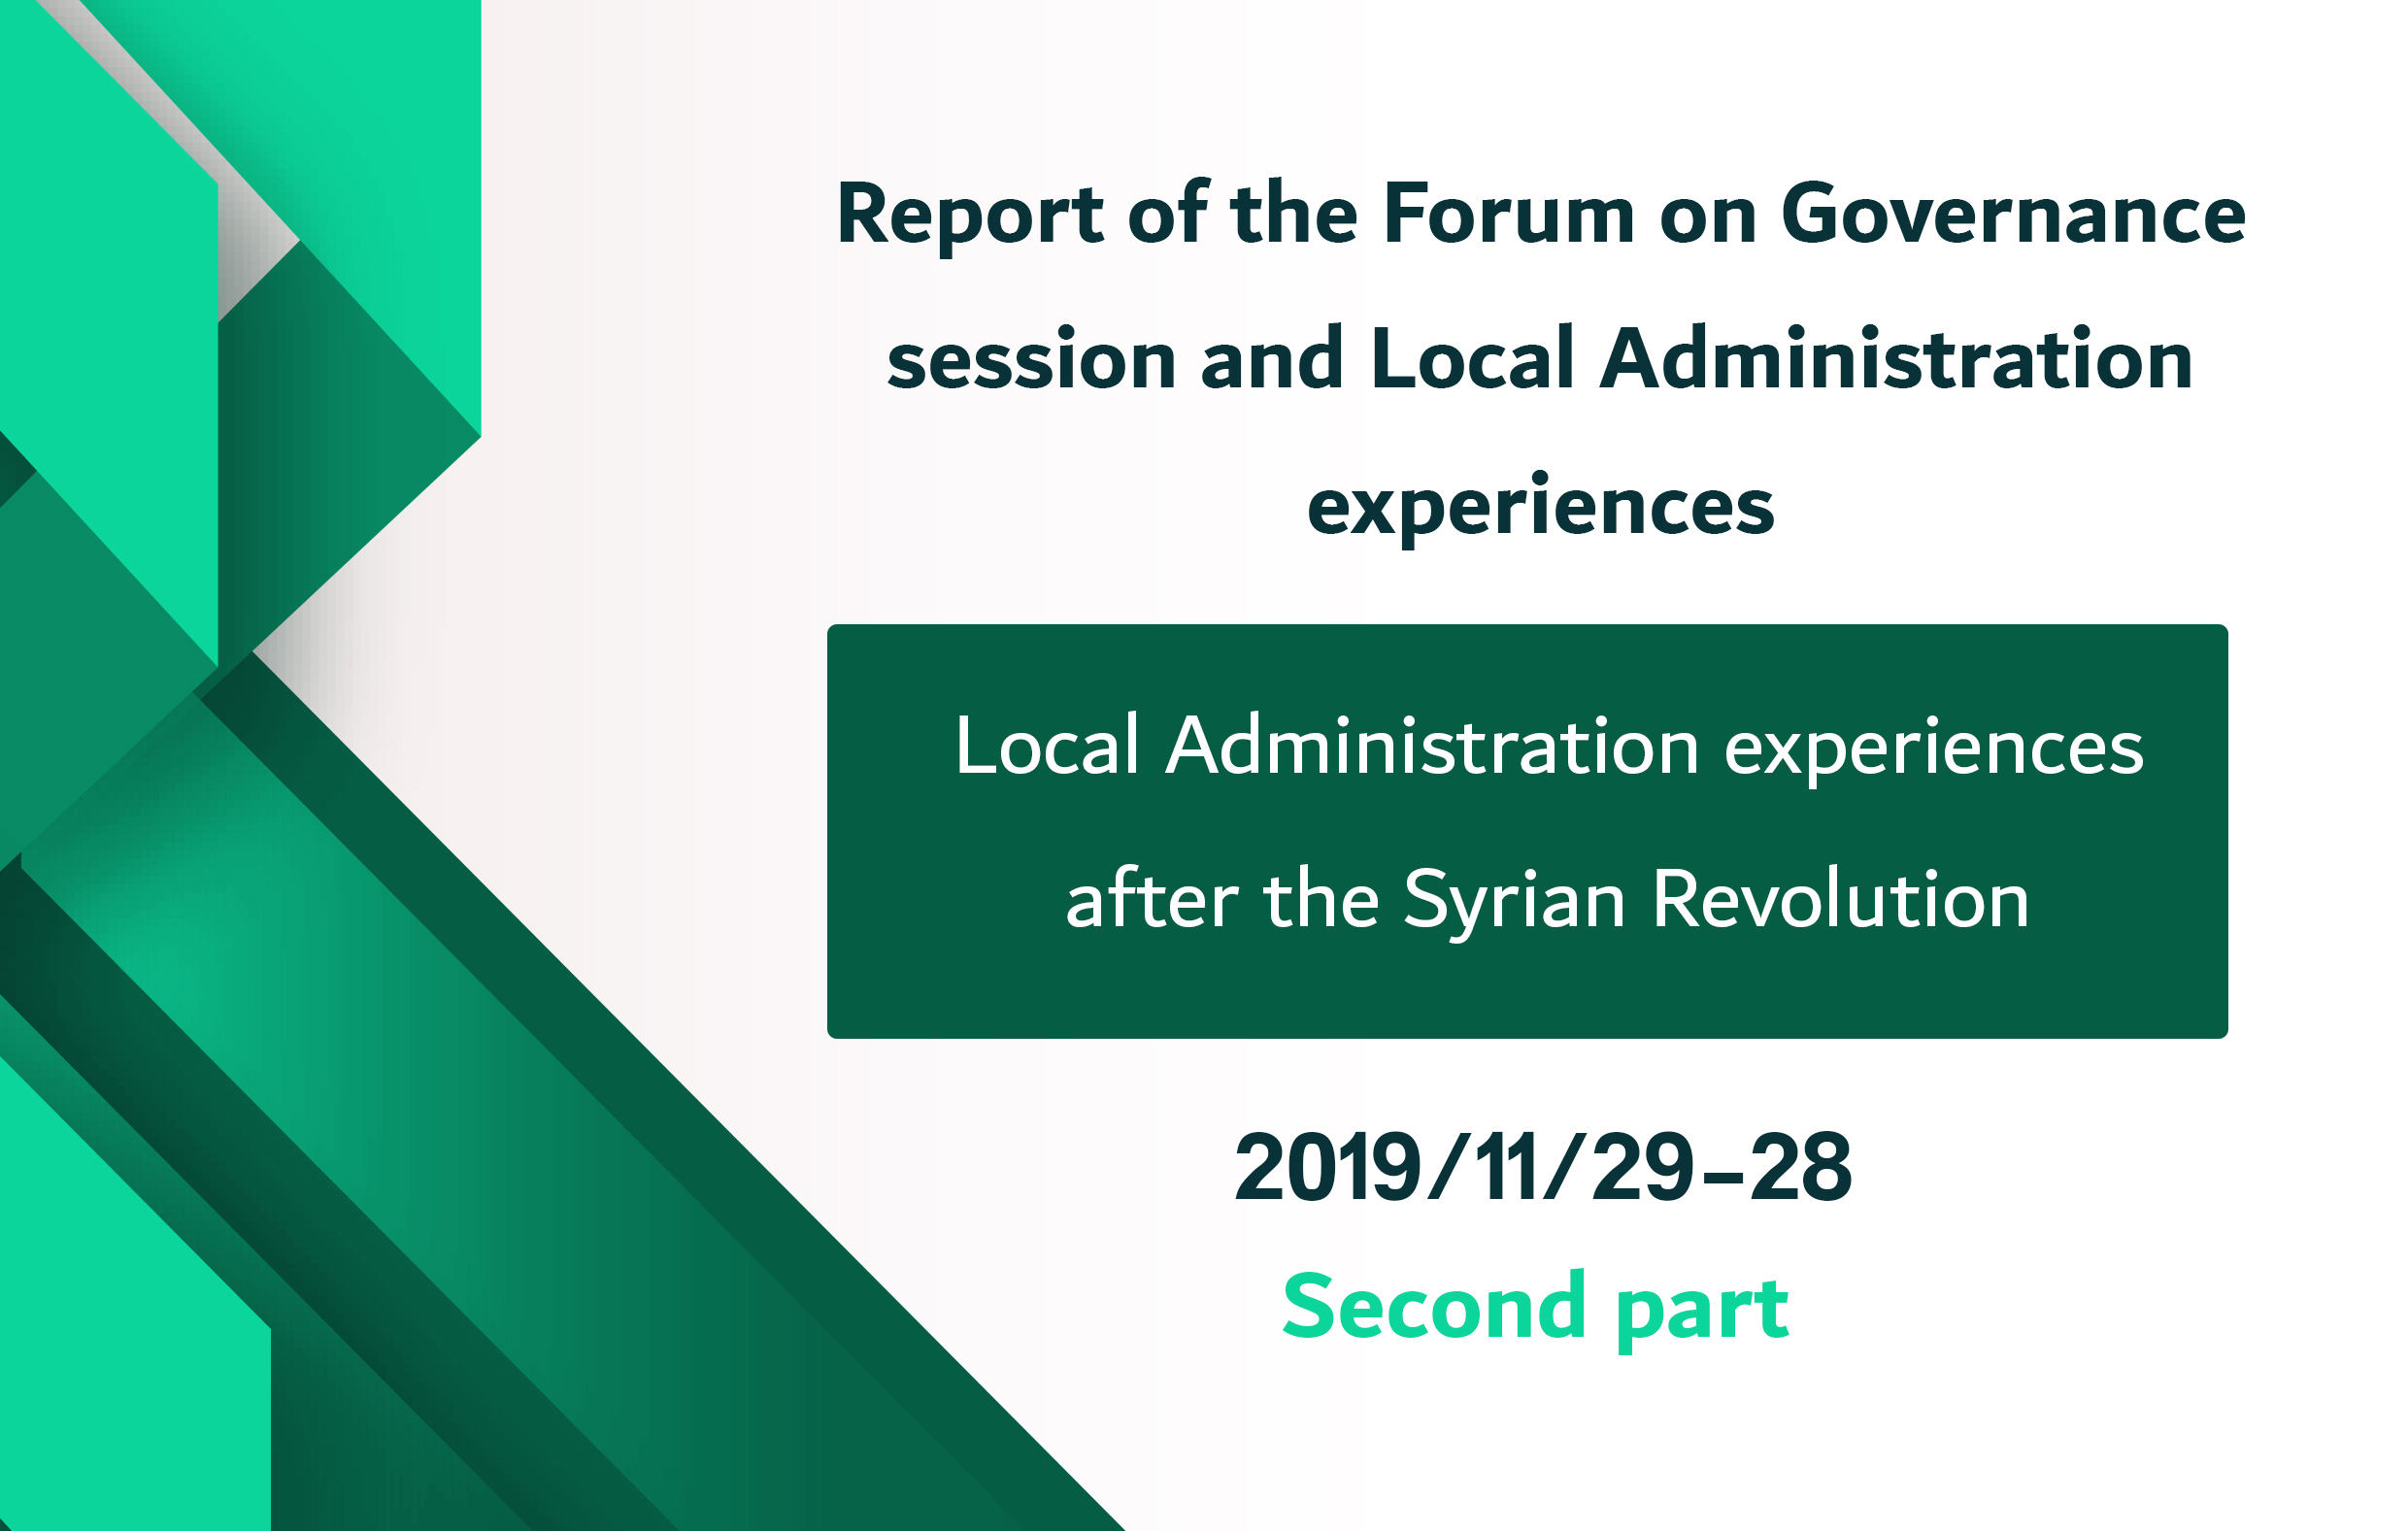 Report of the Forum on Governance session and Local Administration experiences